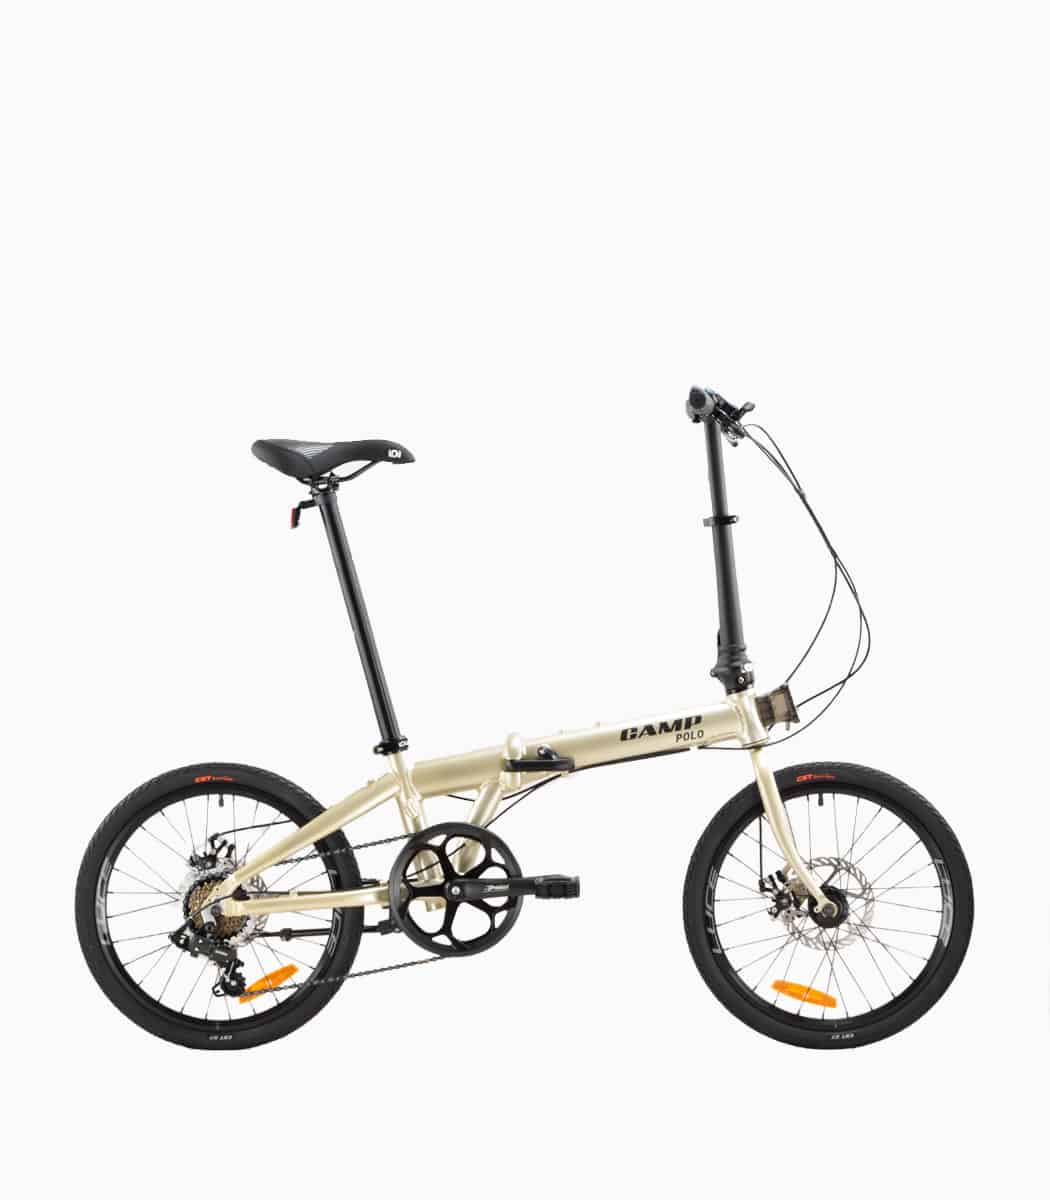 CAMP Polo (CHAMPAGNE) foldable bicycle right